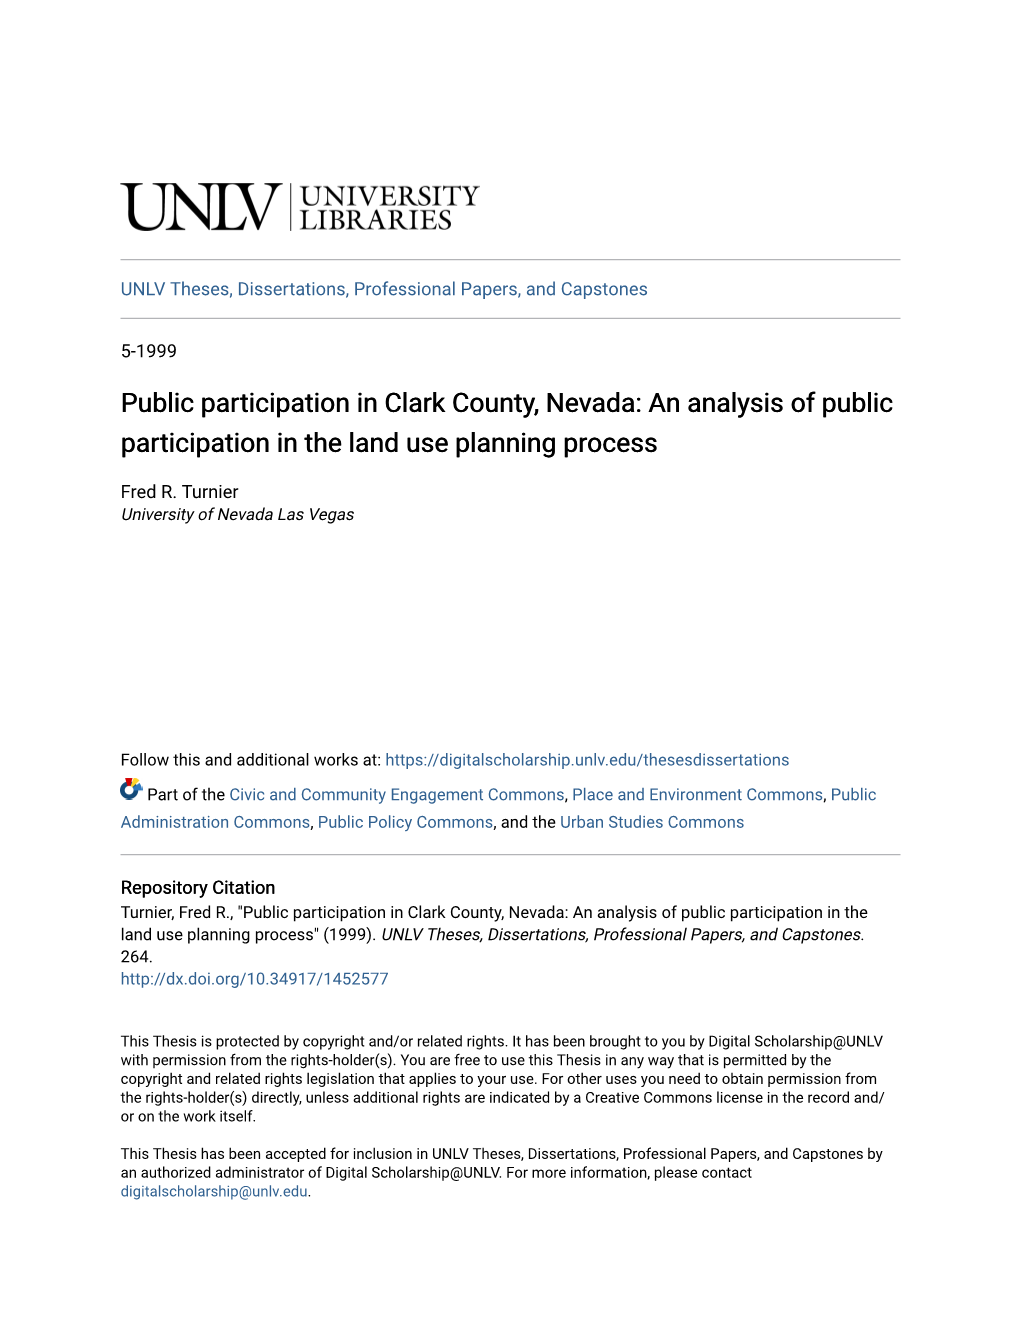 Public Participation in Clark County, Nevada: an Analysis of Public Participation in the Land Use Planning Process